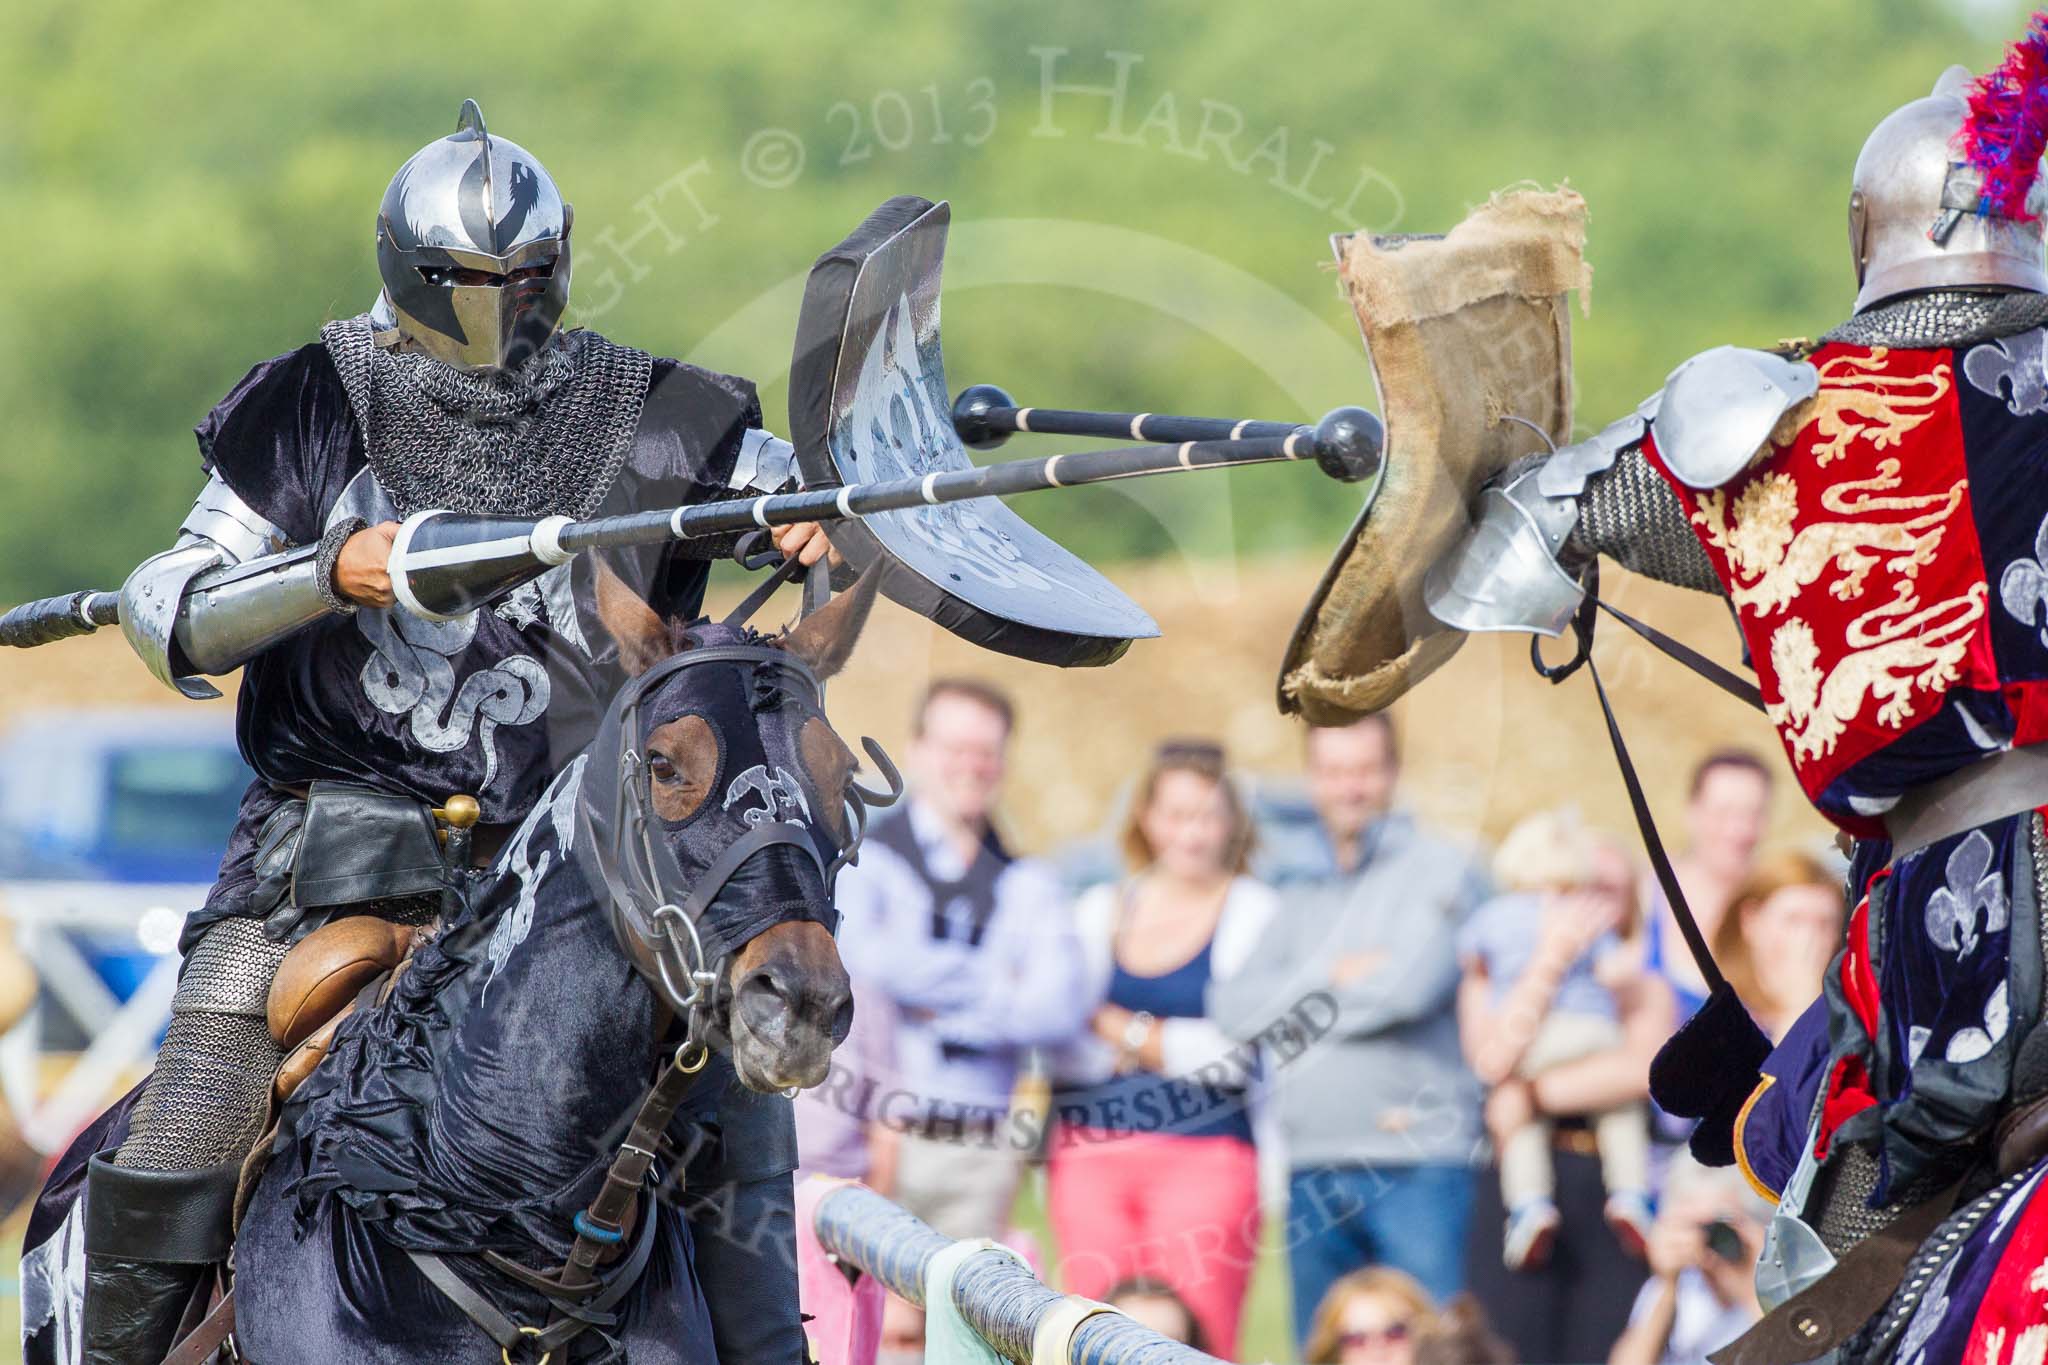 DBPC Polo in the Park 2013 - jousting display by the Knights of Middle England.
Dallas Burston Polo Club, ,
Southam,
Warwickshire,
United Kingdom,
on 01 September 2013 at 15:42, image #513